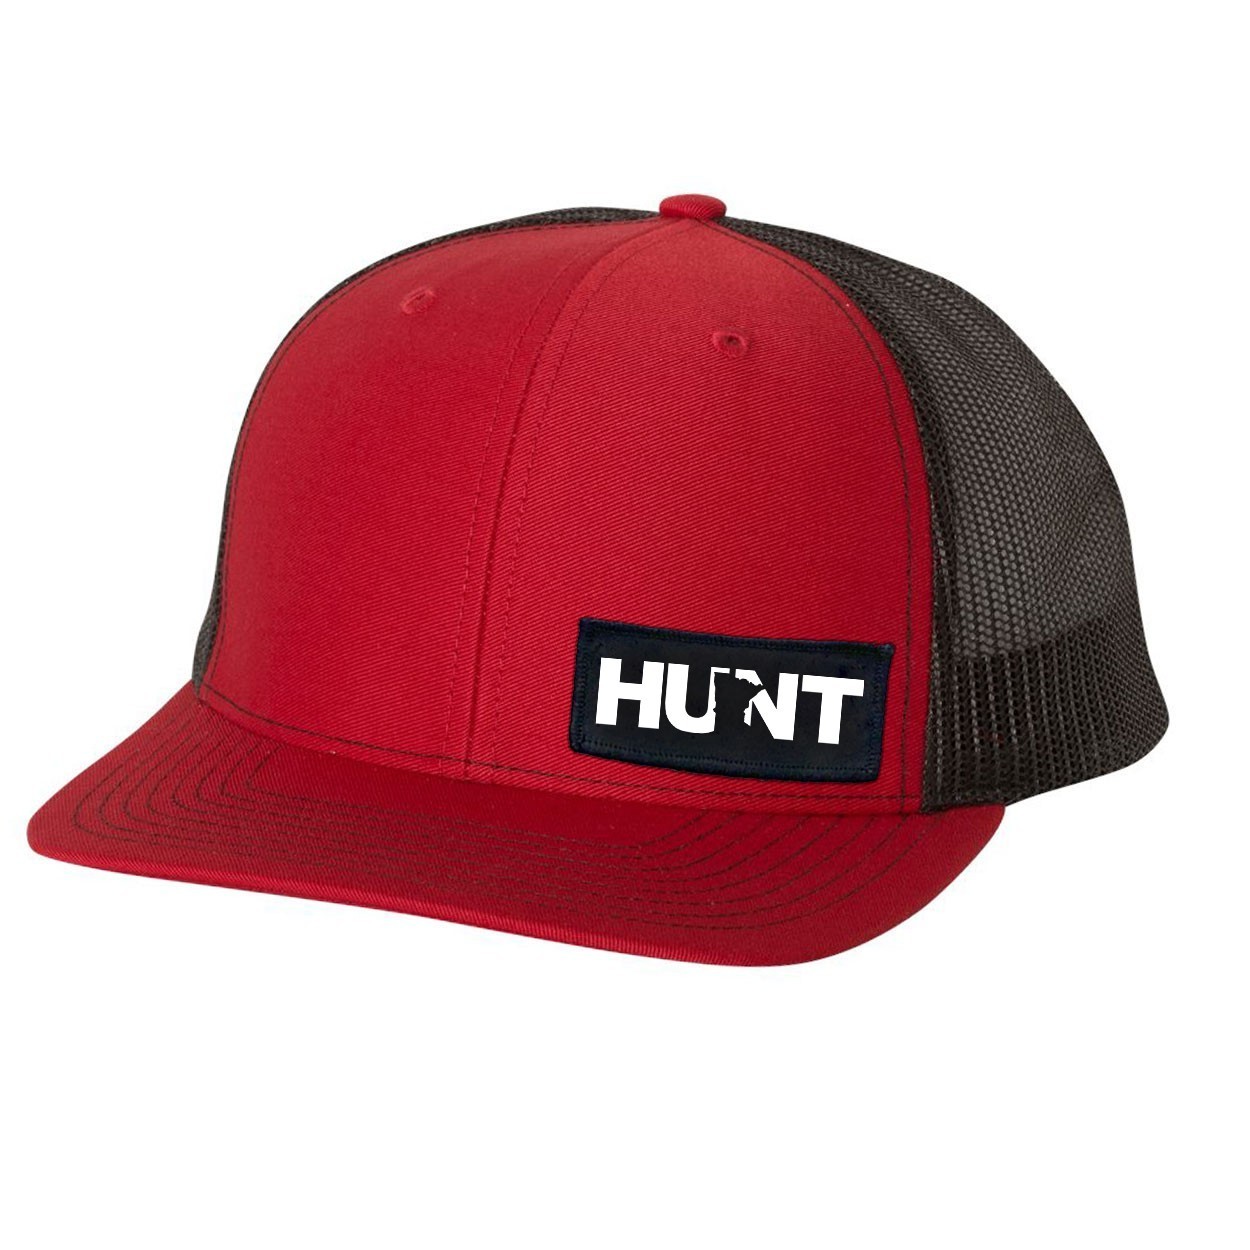 Hunt Minnesota Night Out Woven Patch Snapback Trucker Hat Red/Black (White Logo)